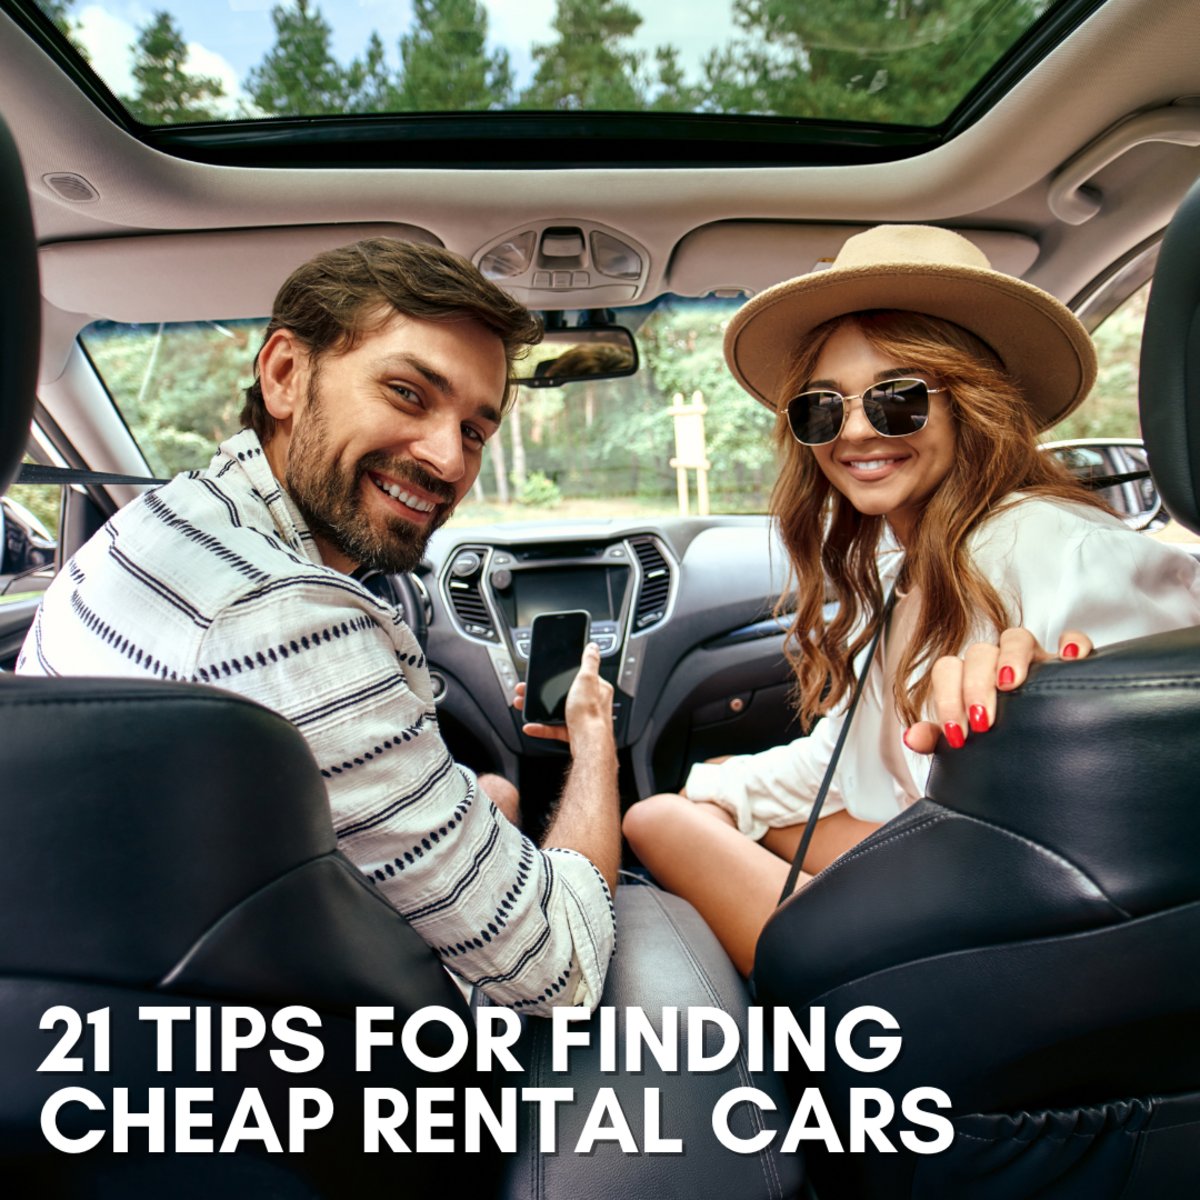 Planning on hitting the open road on your way to Naples? 🚗 Read these 21 tips for scoring sweet deals on #rentalcars so that you can explore without breaking the bank. bit.ly/3uBCqBJ #roadtrip #savvytraveler